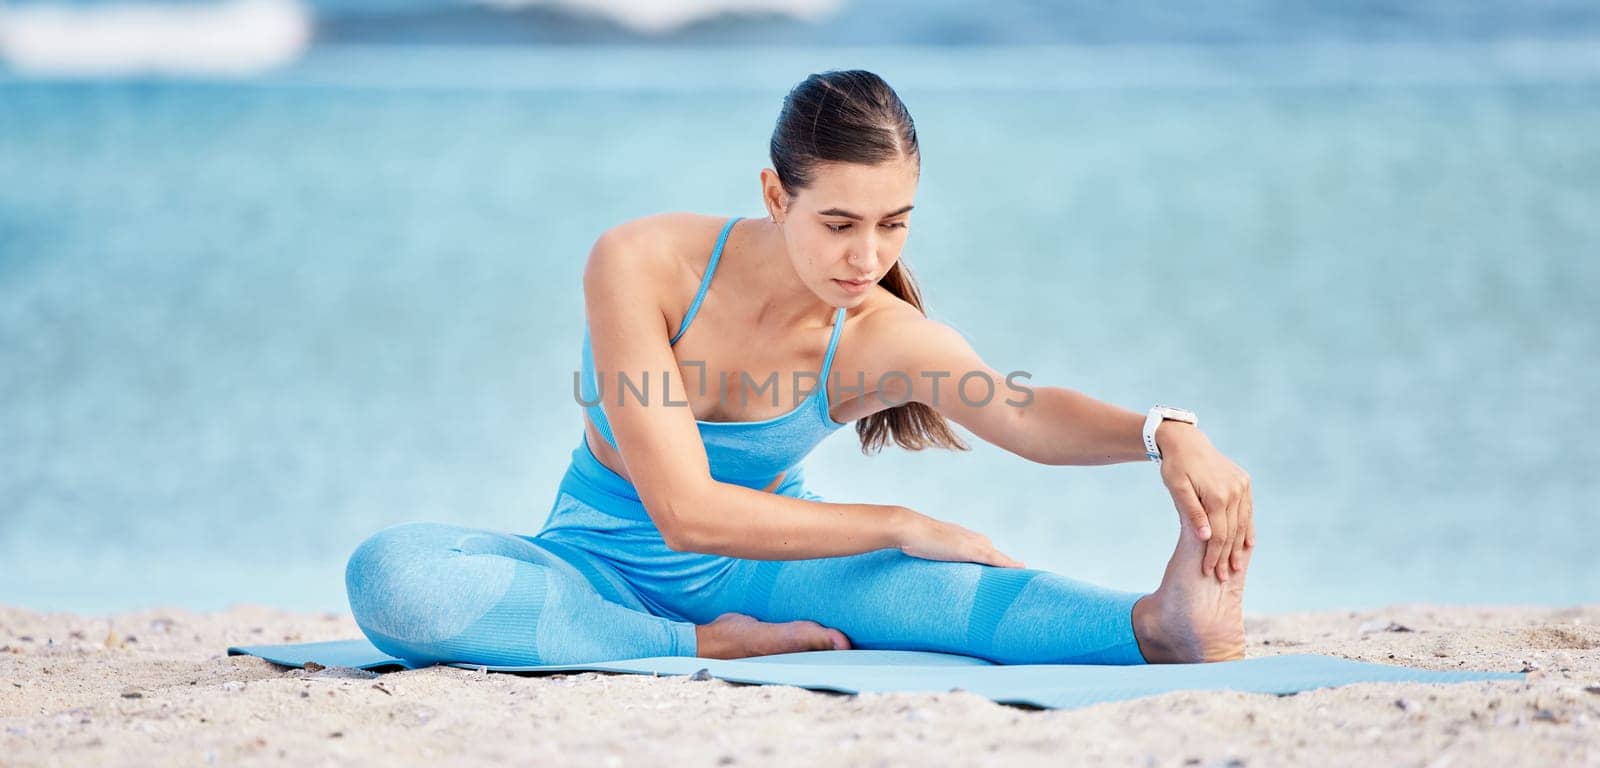 Stretching legs, yoga and woman by beach on sports mat for wellness, healthy body and balance. Performance, nature and female person outdoors for exercise, training and workout by sea for pilates.